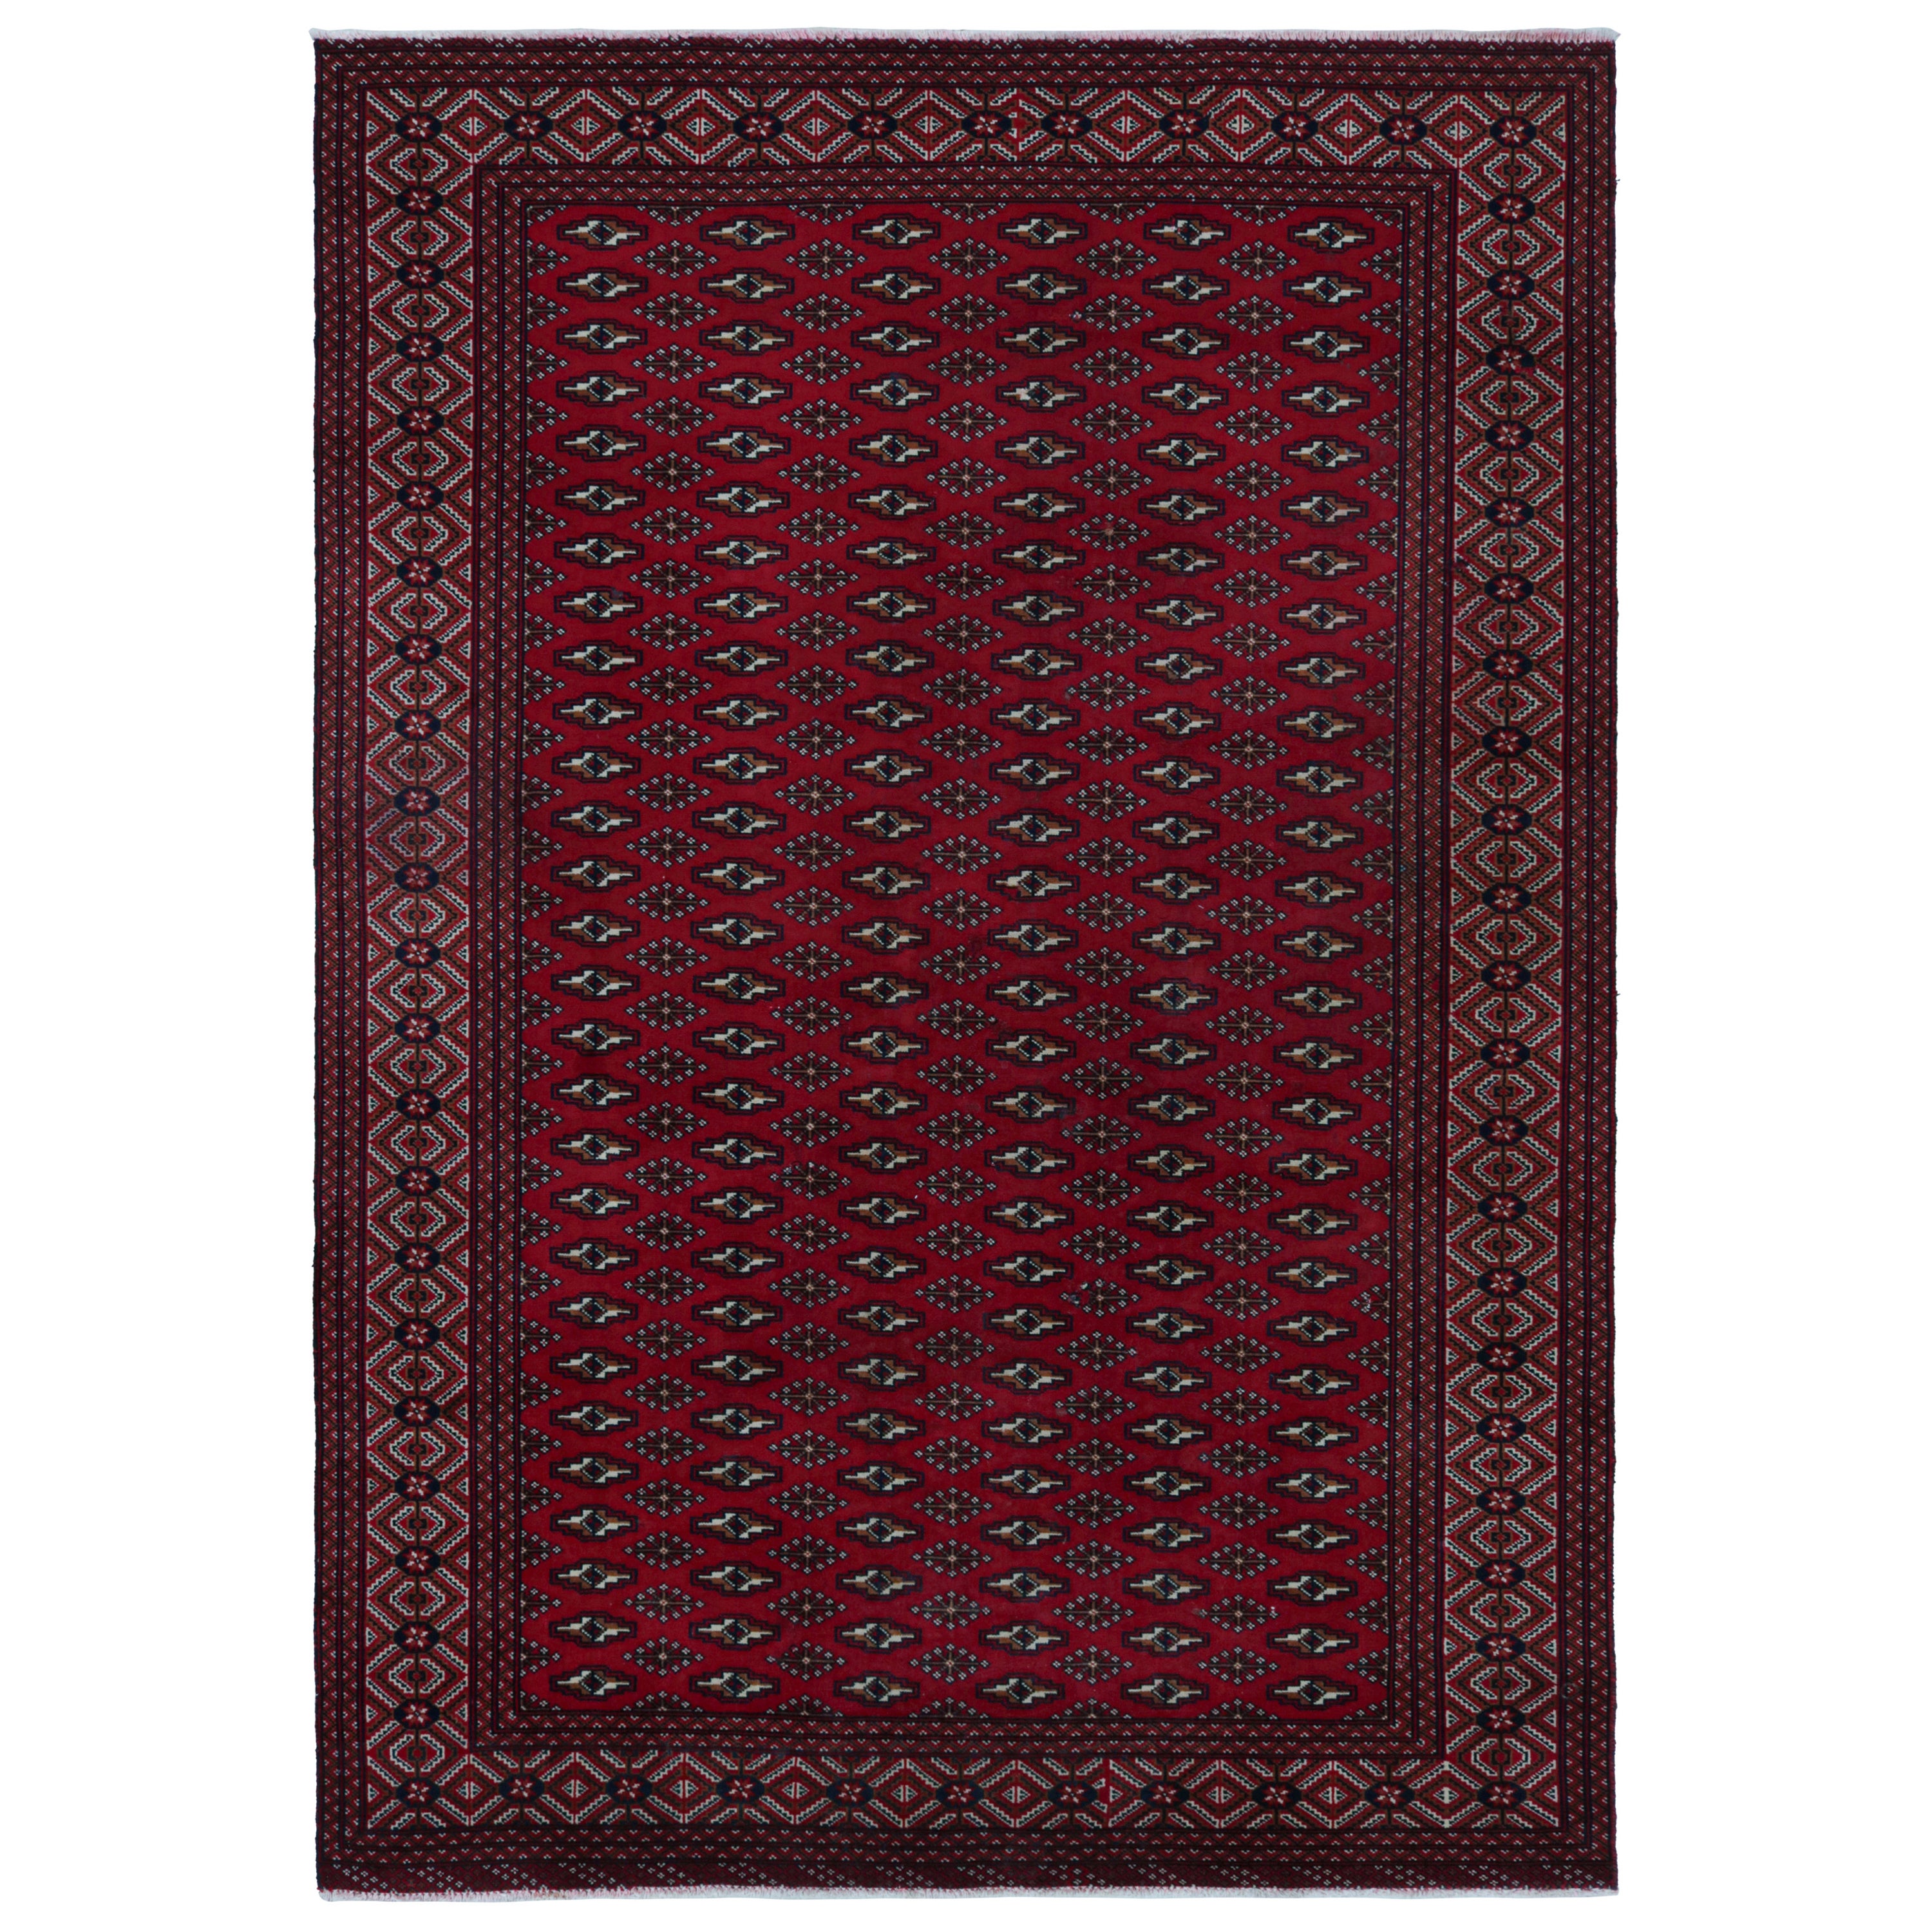 Vintage Persian rug in Red with Beige-Brown Geometric Patterns by Rug & Kilim For Sale